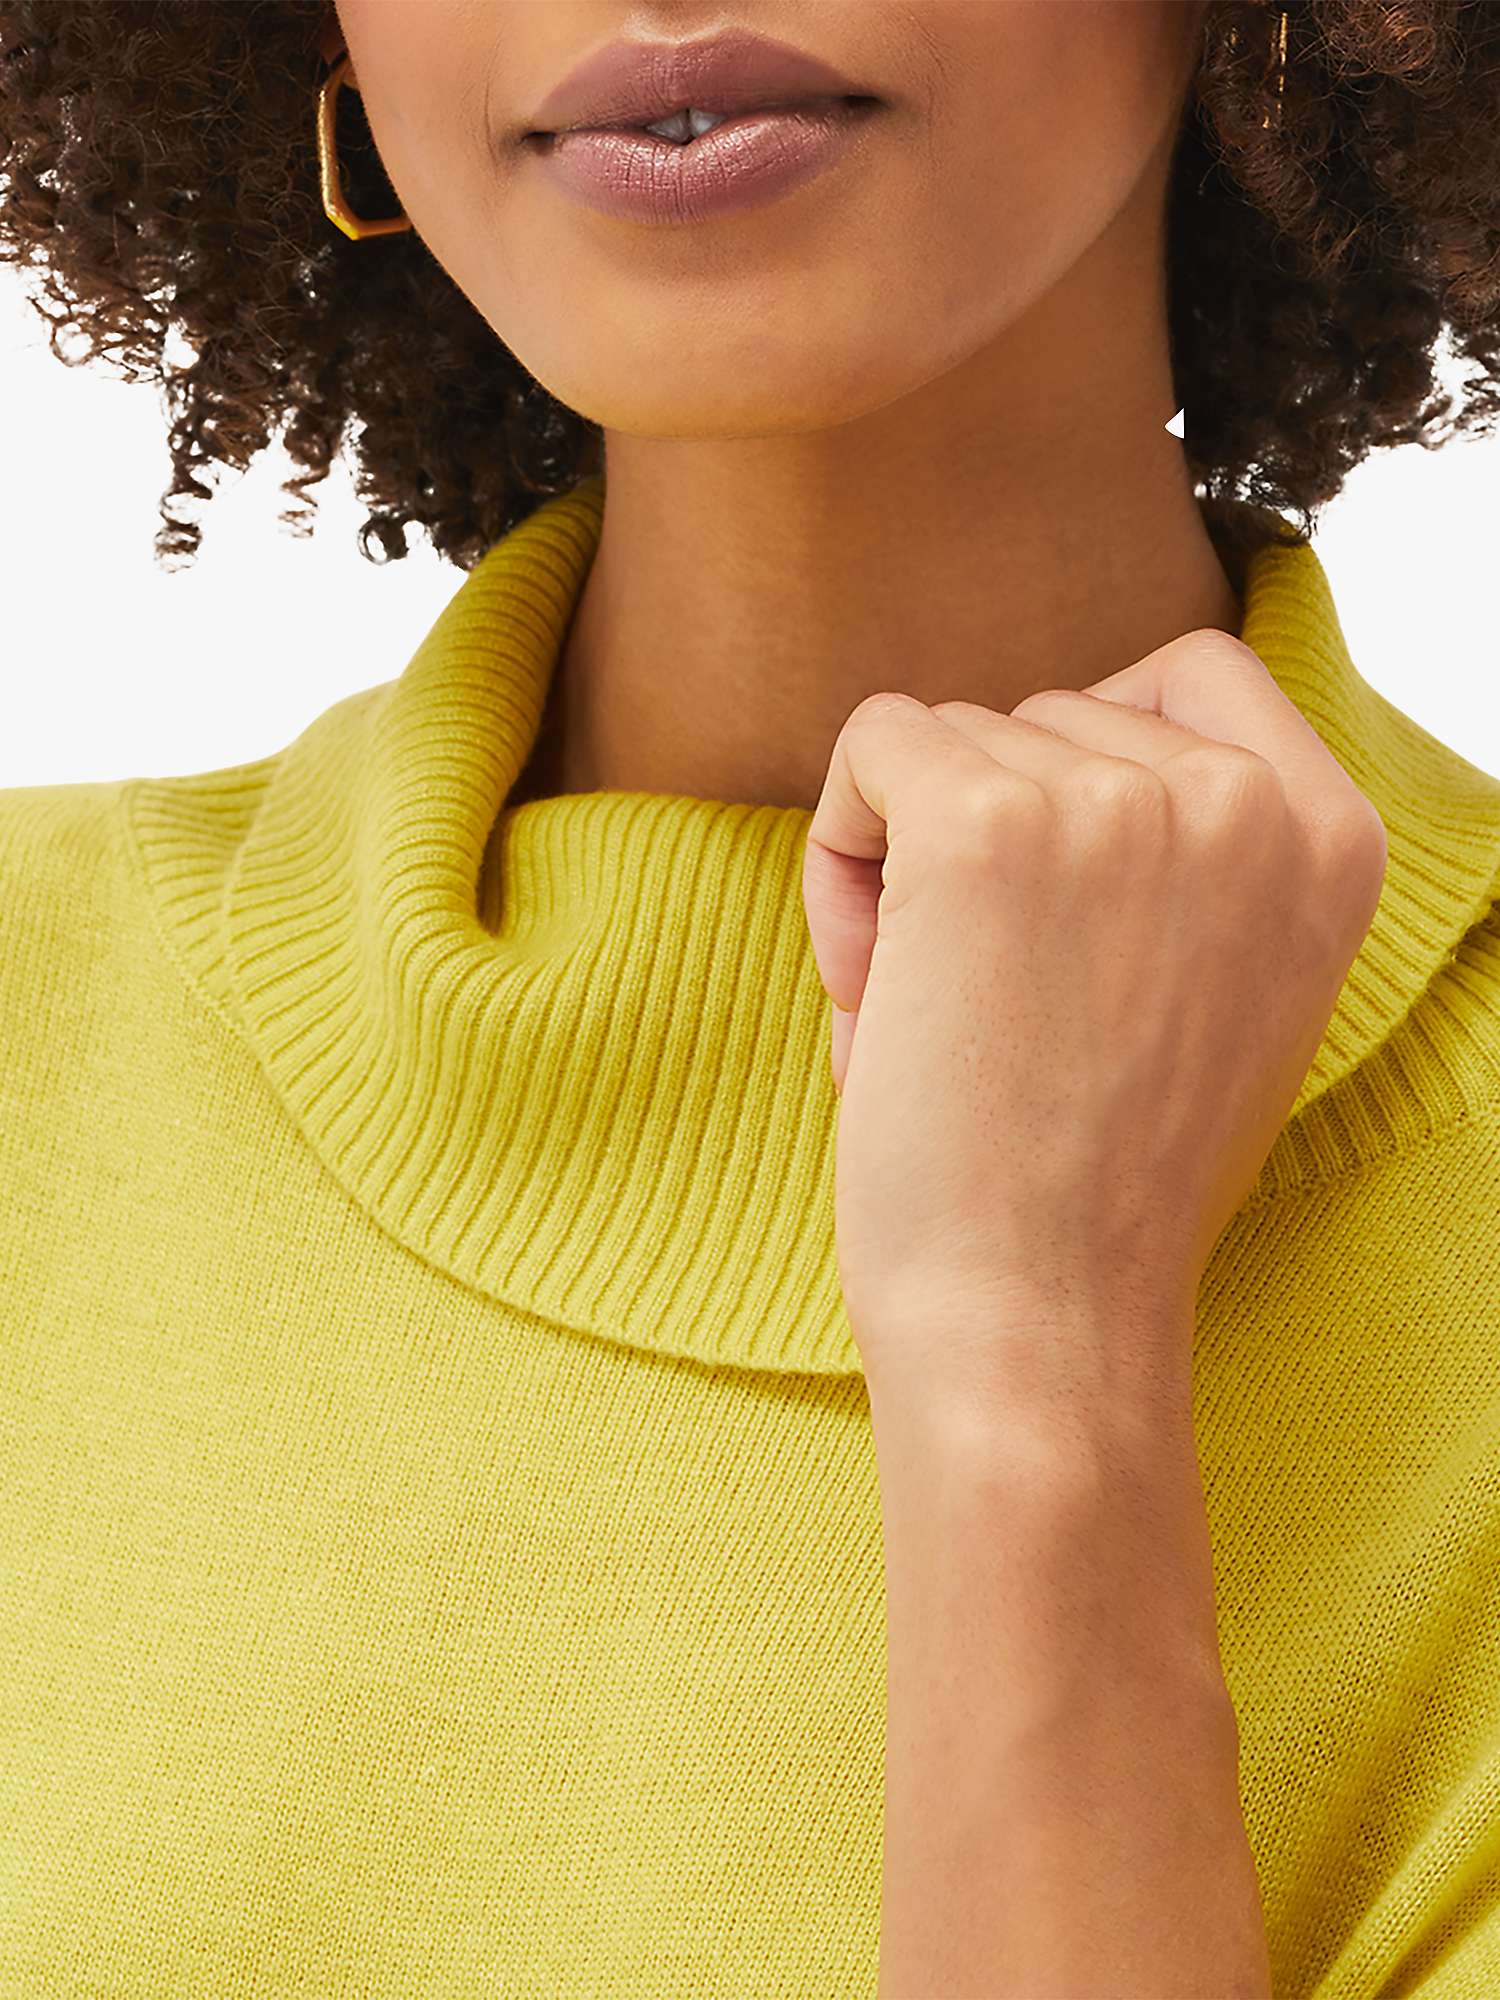 Buy Phase Eight Maltia Asymmetric Cowl Neck Jumper, Lime Online at johnlewis.com